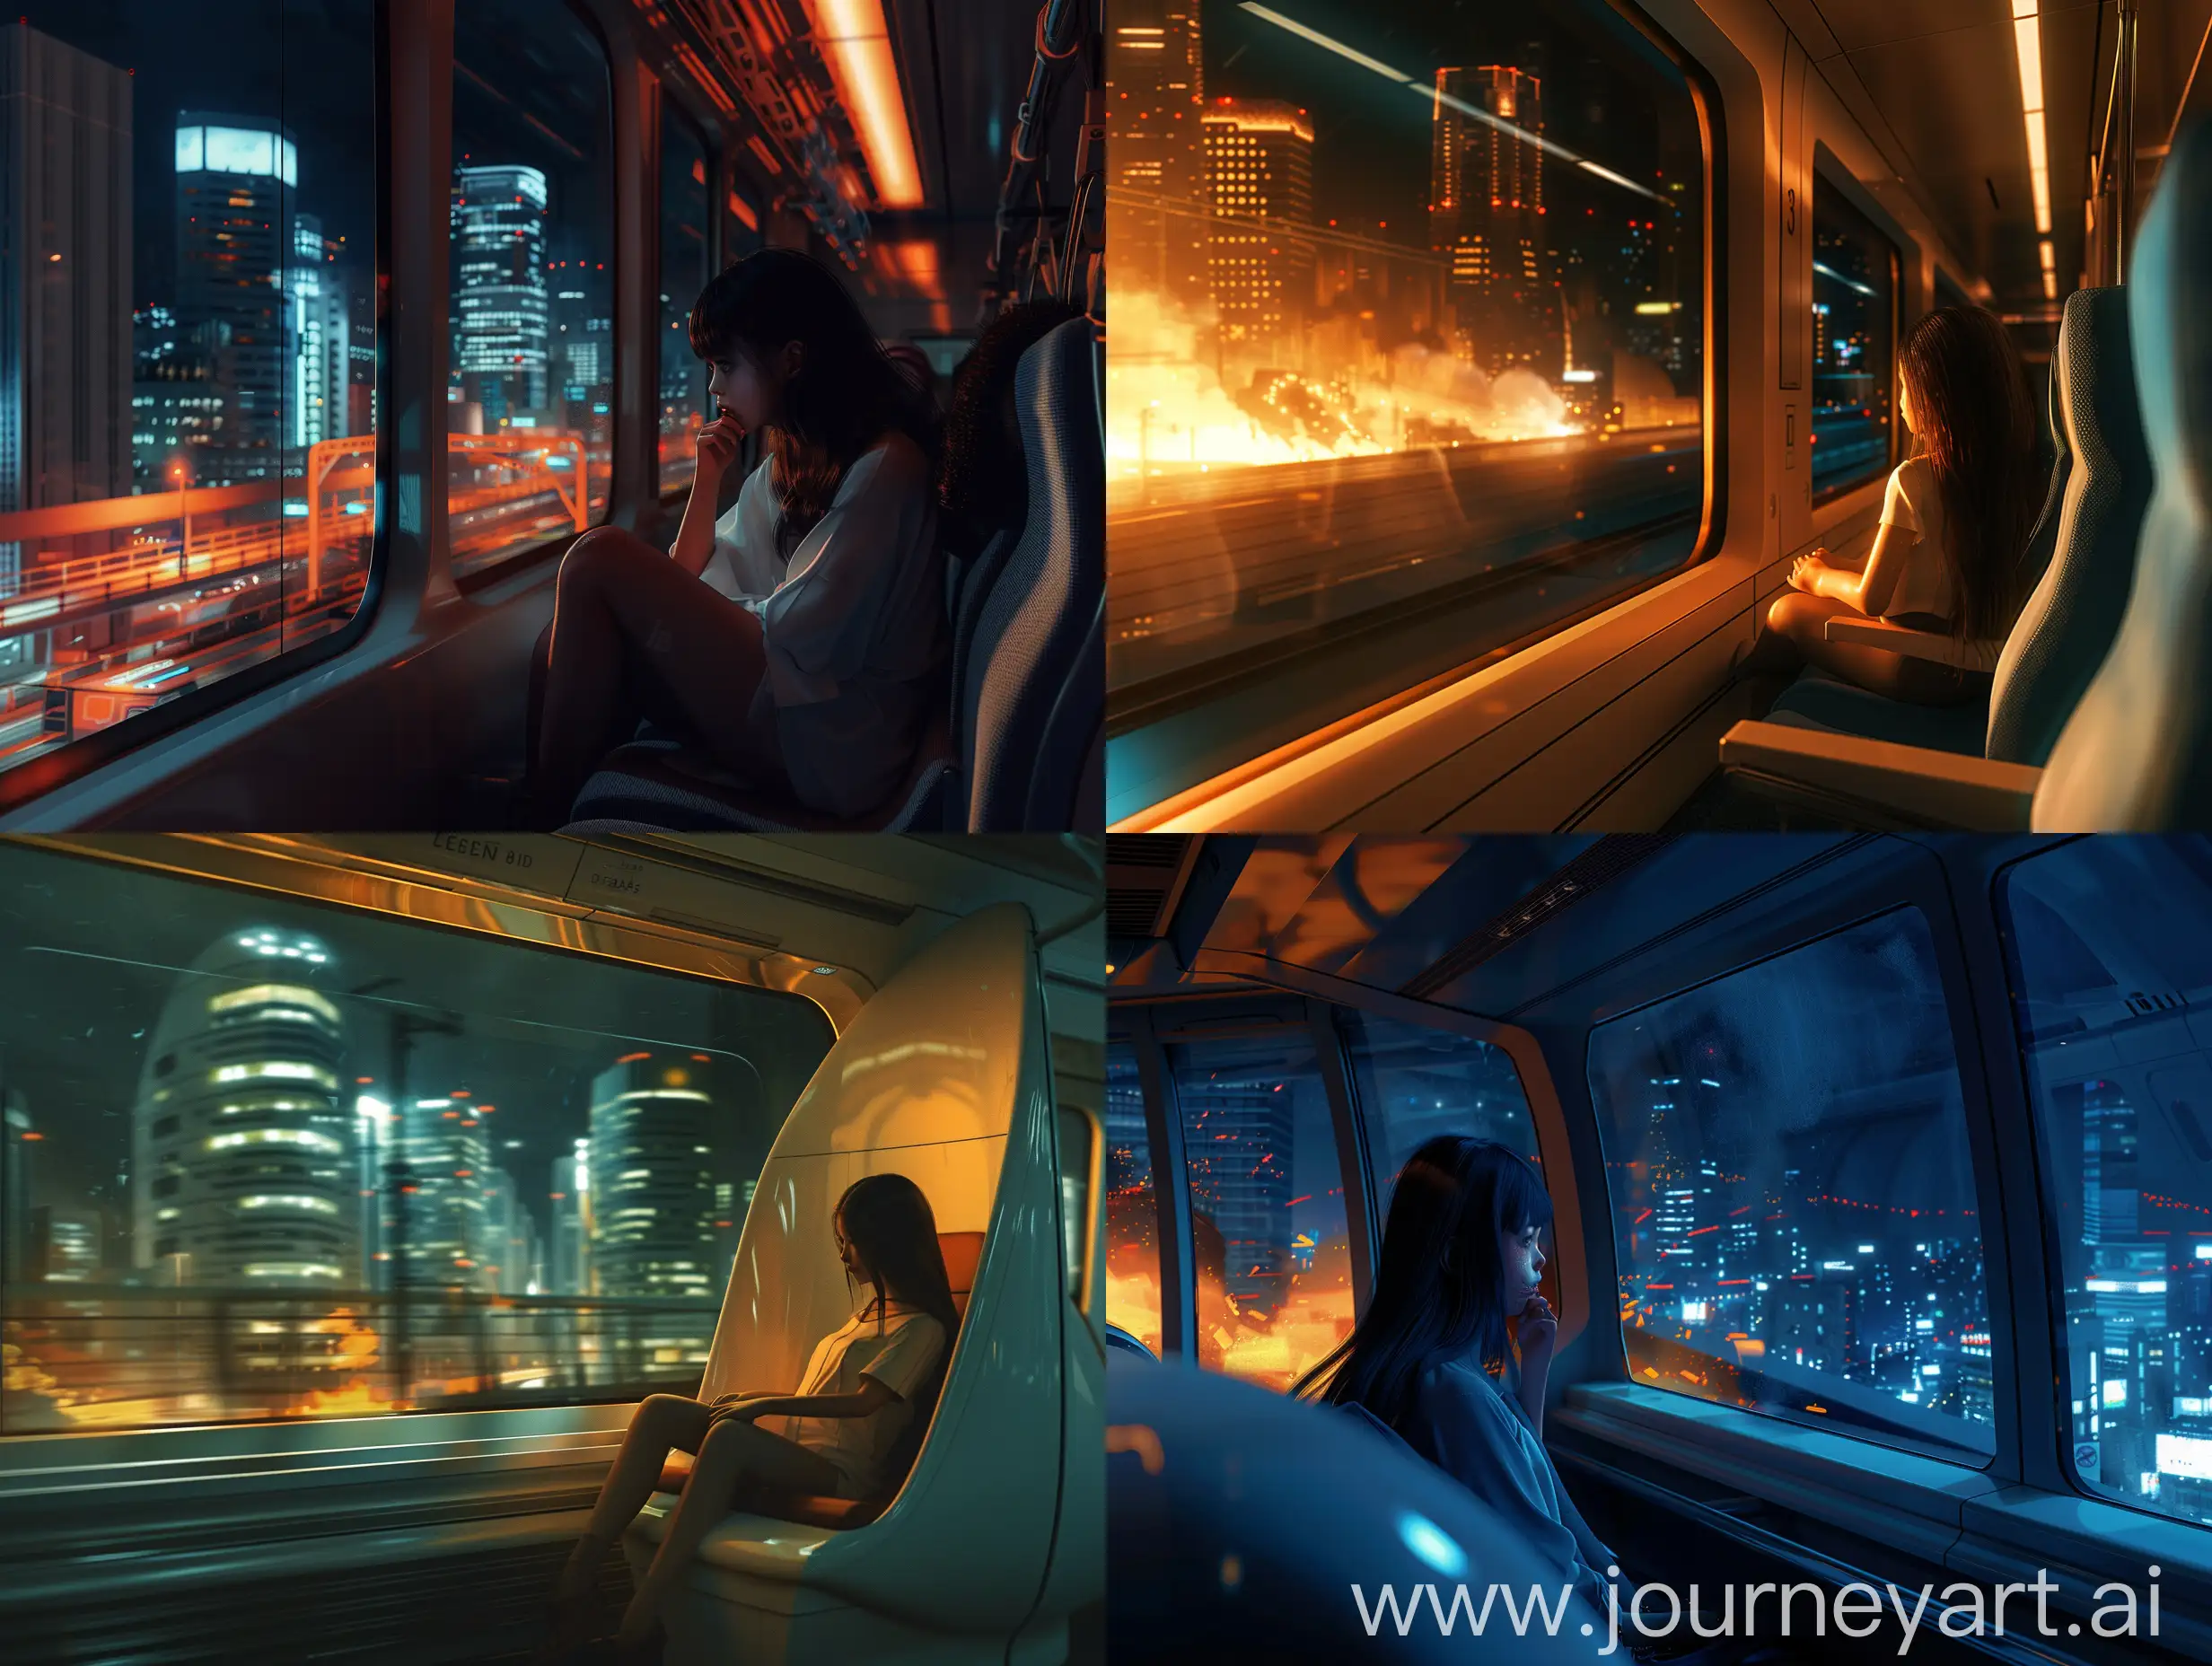 Lonely-Reflections-Girl-in-a-Modern-FastMoving-Train-Gazing-at-a-Burning-City-at-Night